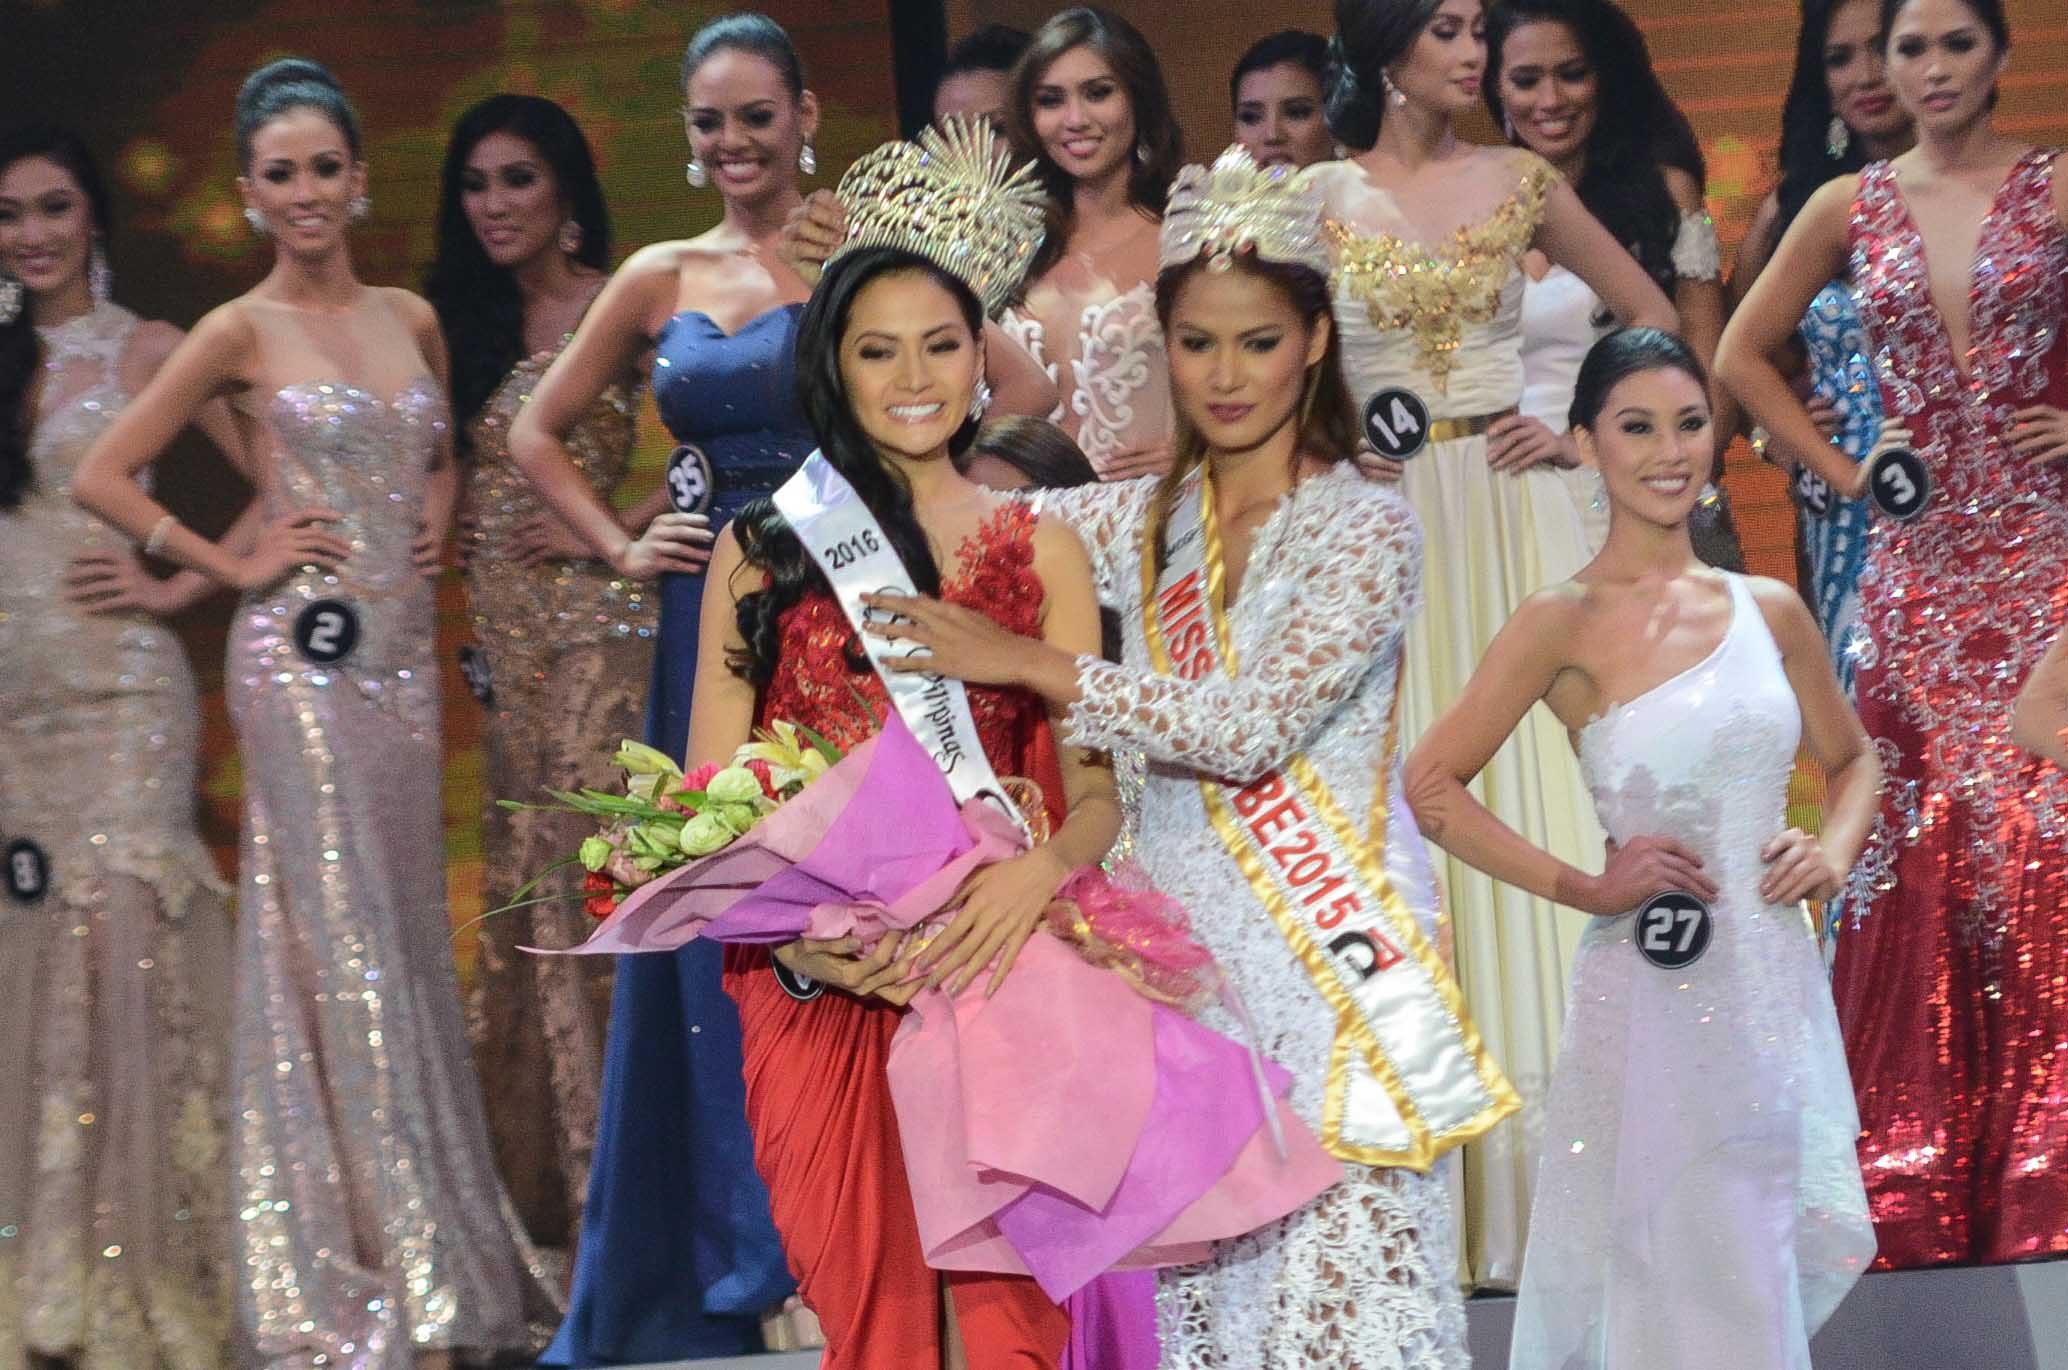 Nichole Manalo is hoping for a back-to-back crown in Miss Globe. Photo by Alecs Ongcal/Rappler 